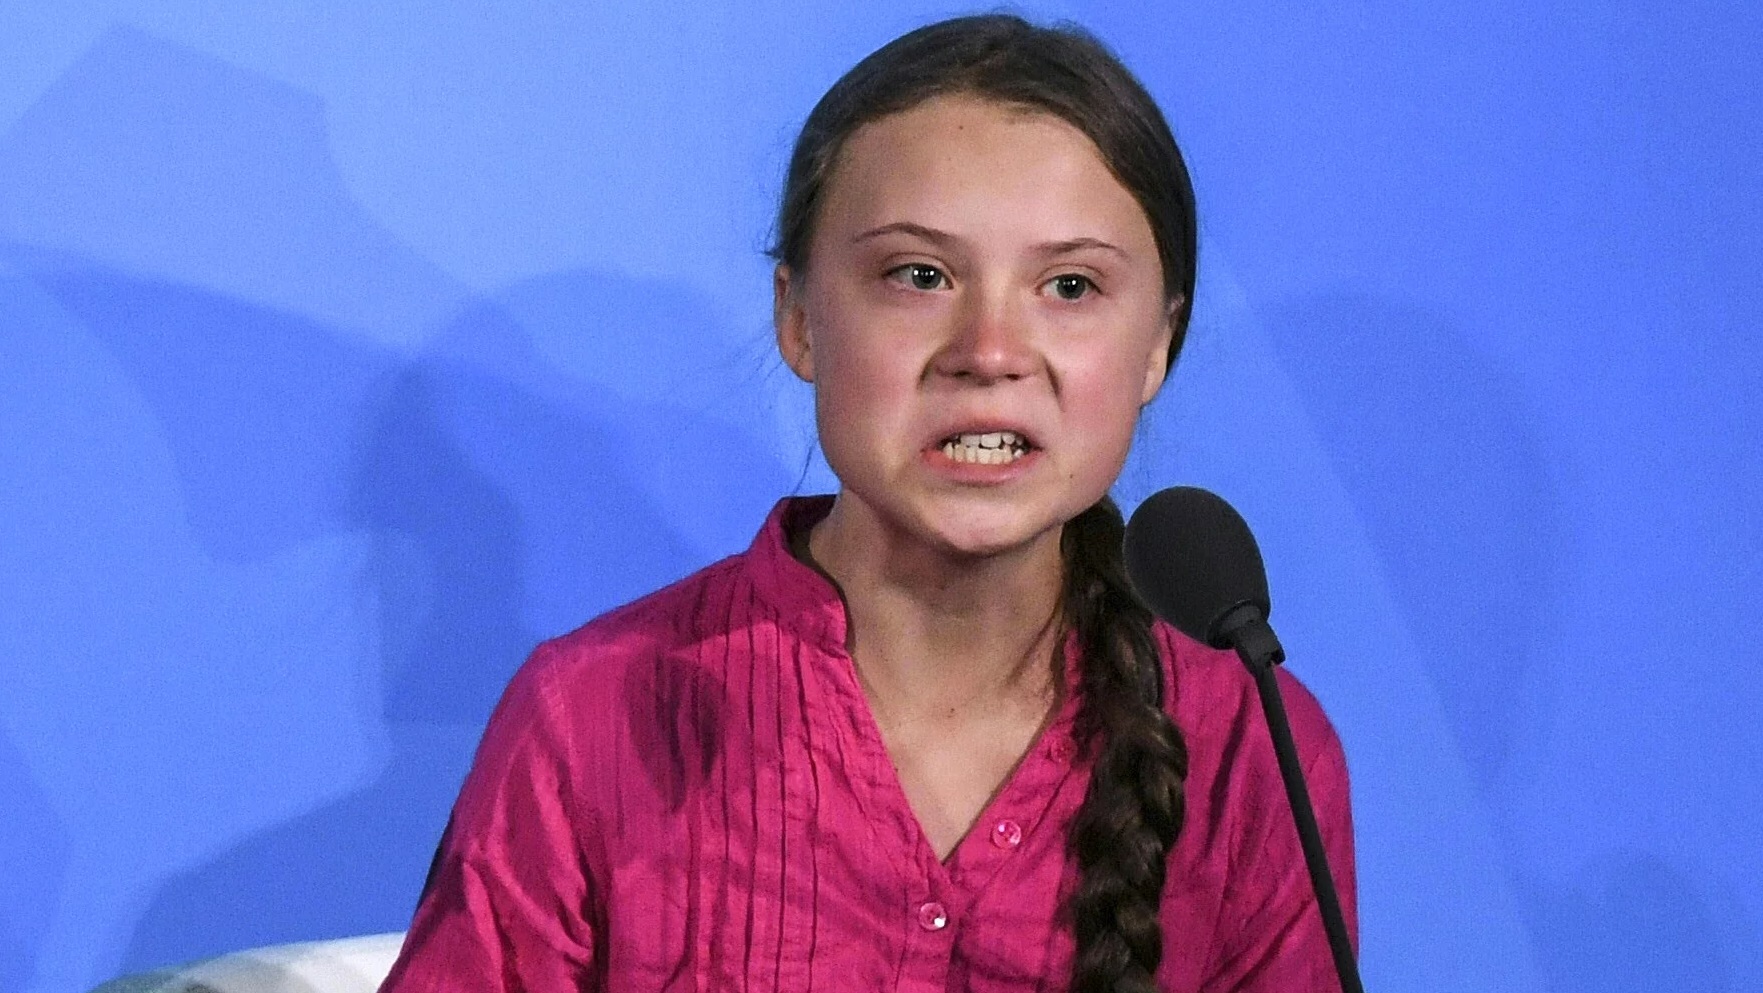 7-year-old children left psychologically terrorized after hearing Greta Thunberg speech… “I don’t want to die!”